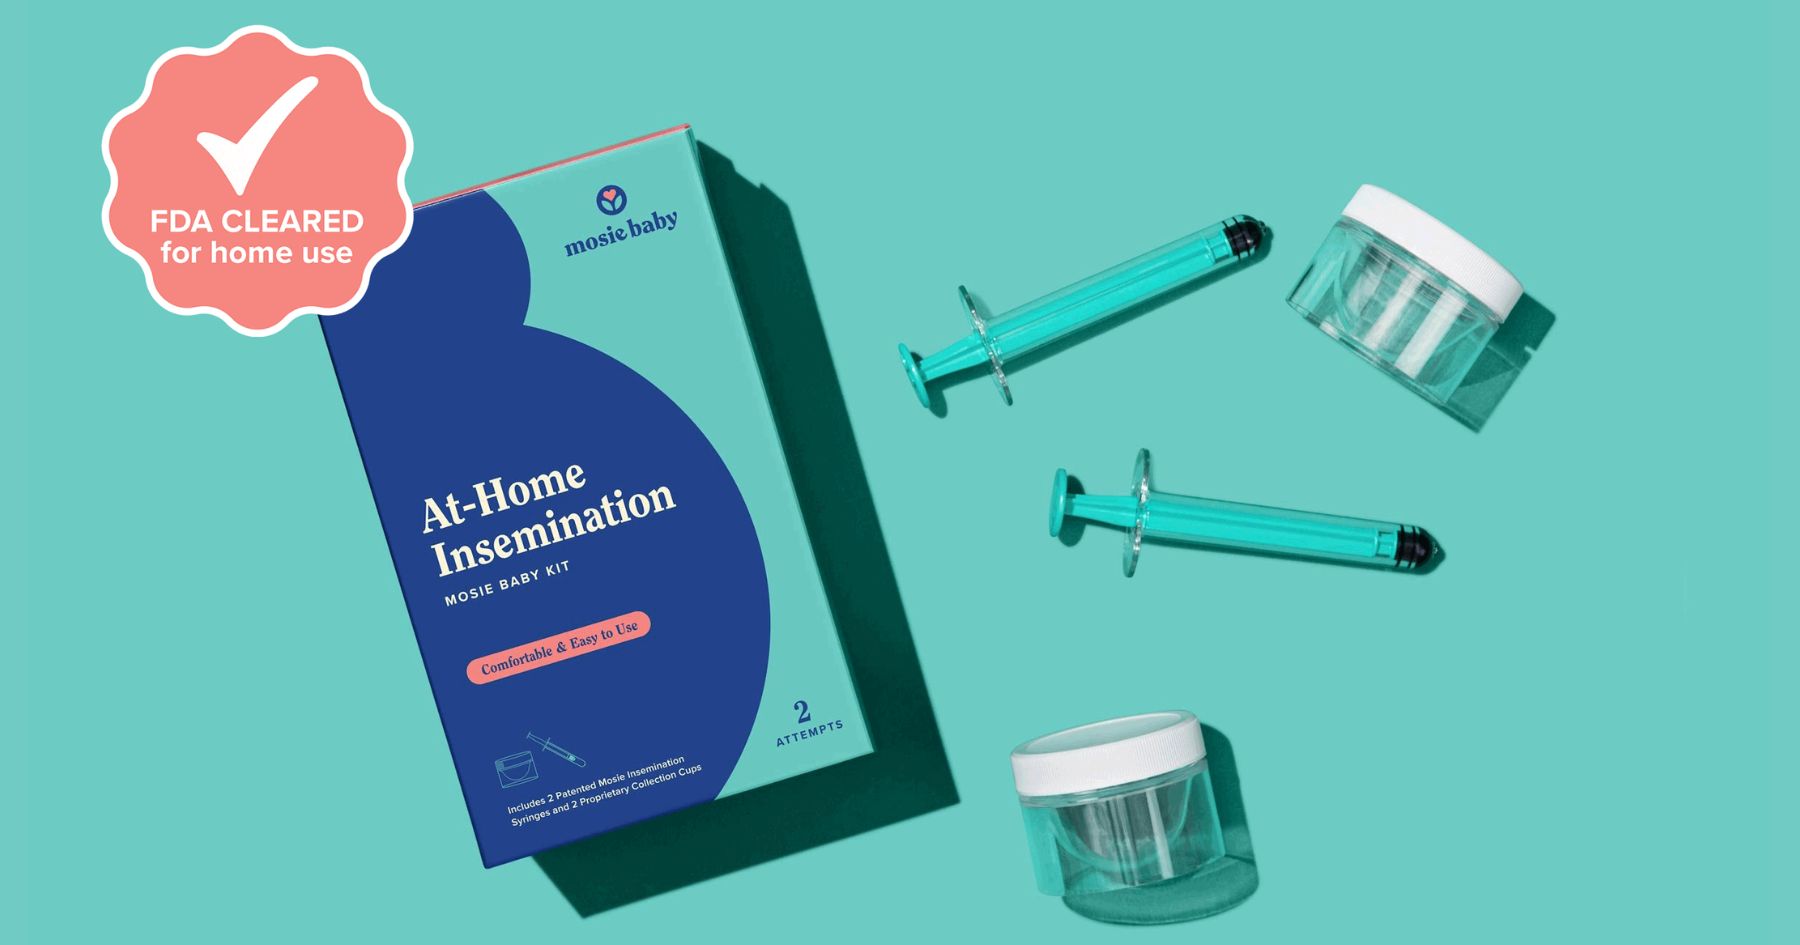 Mosie Baby becomes the first company to receive FDA Clearance for at-home intravaginal insemination